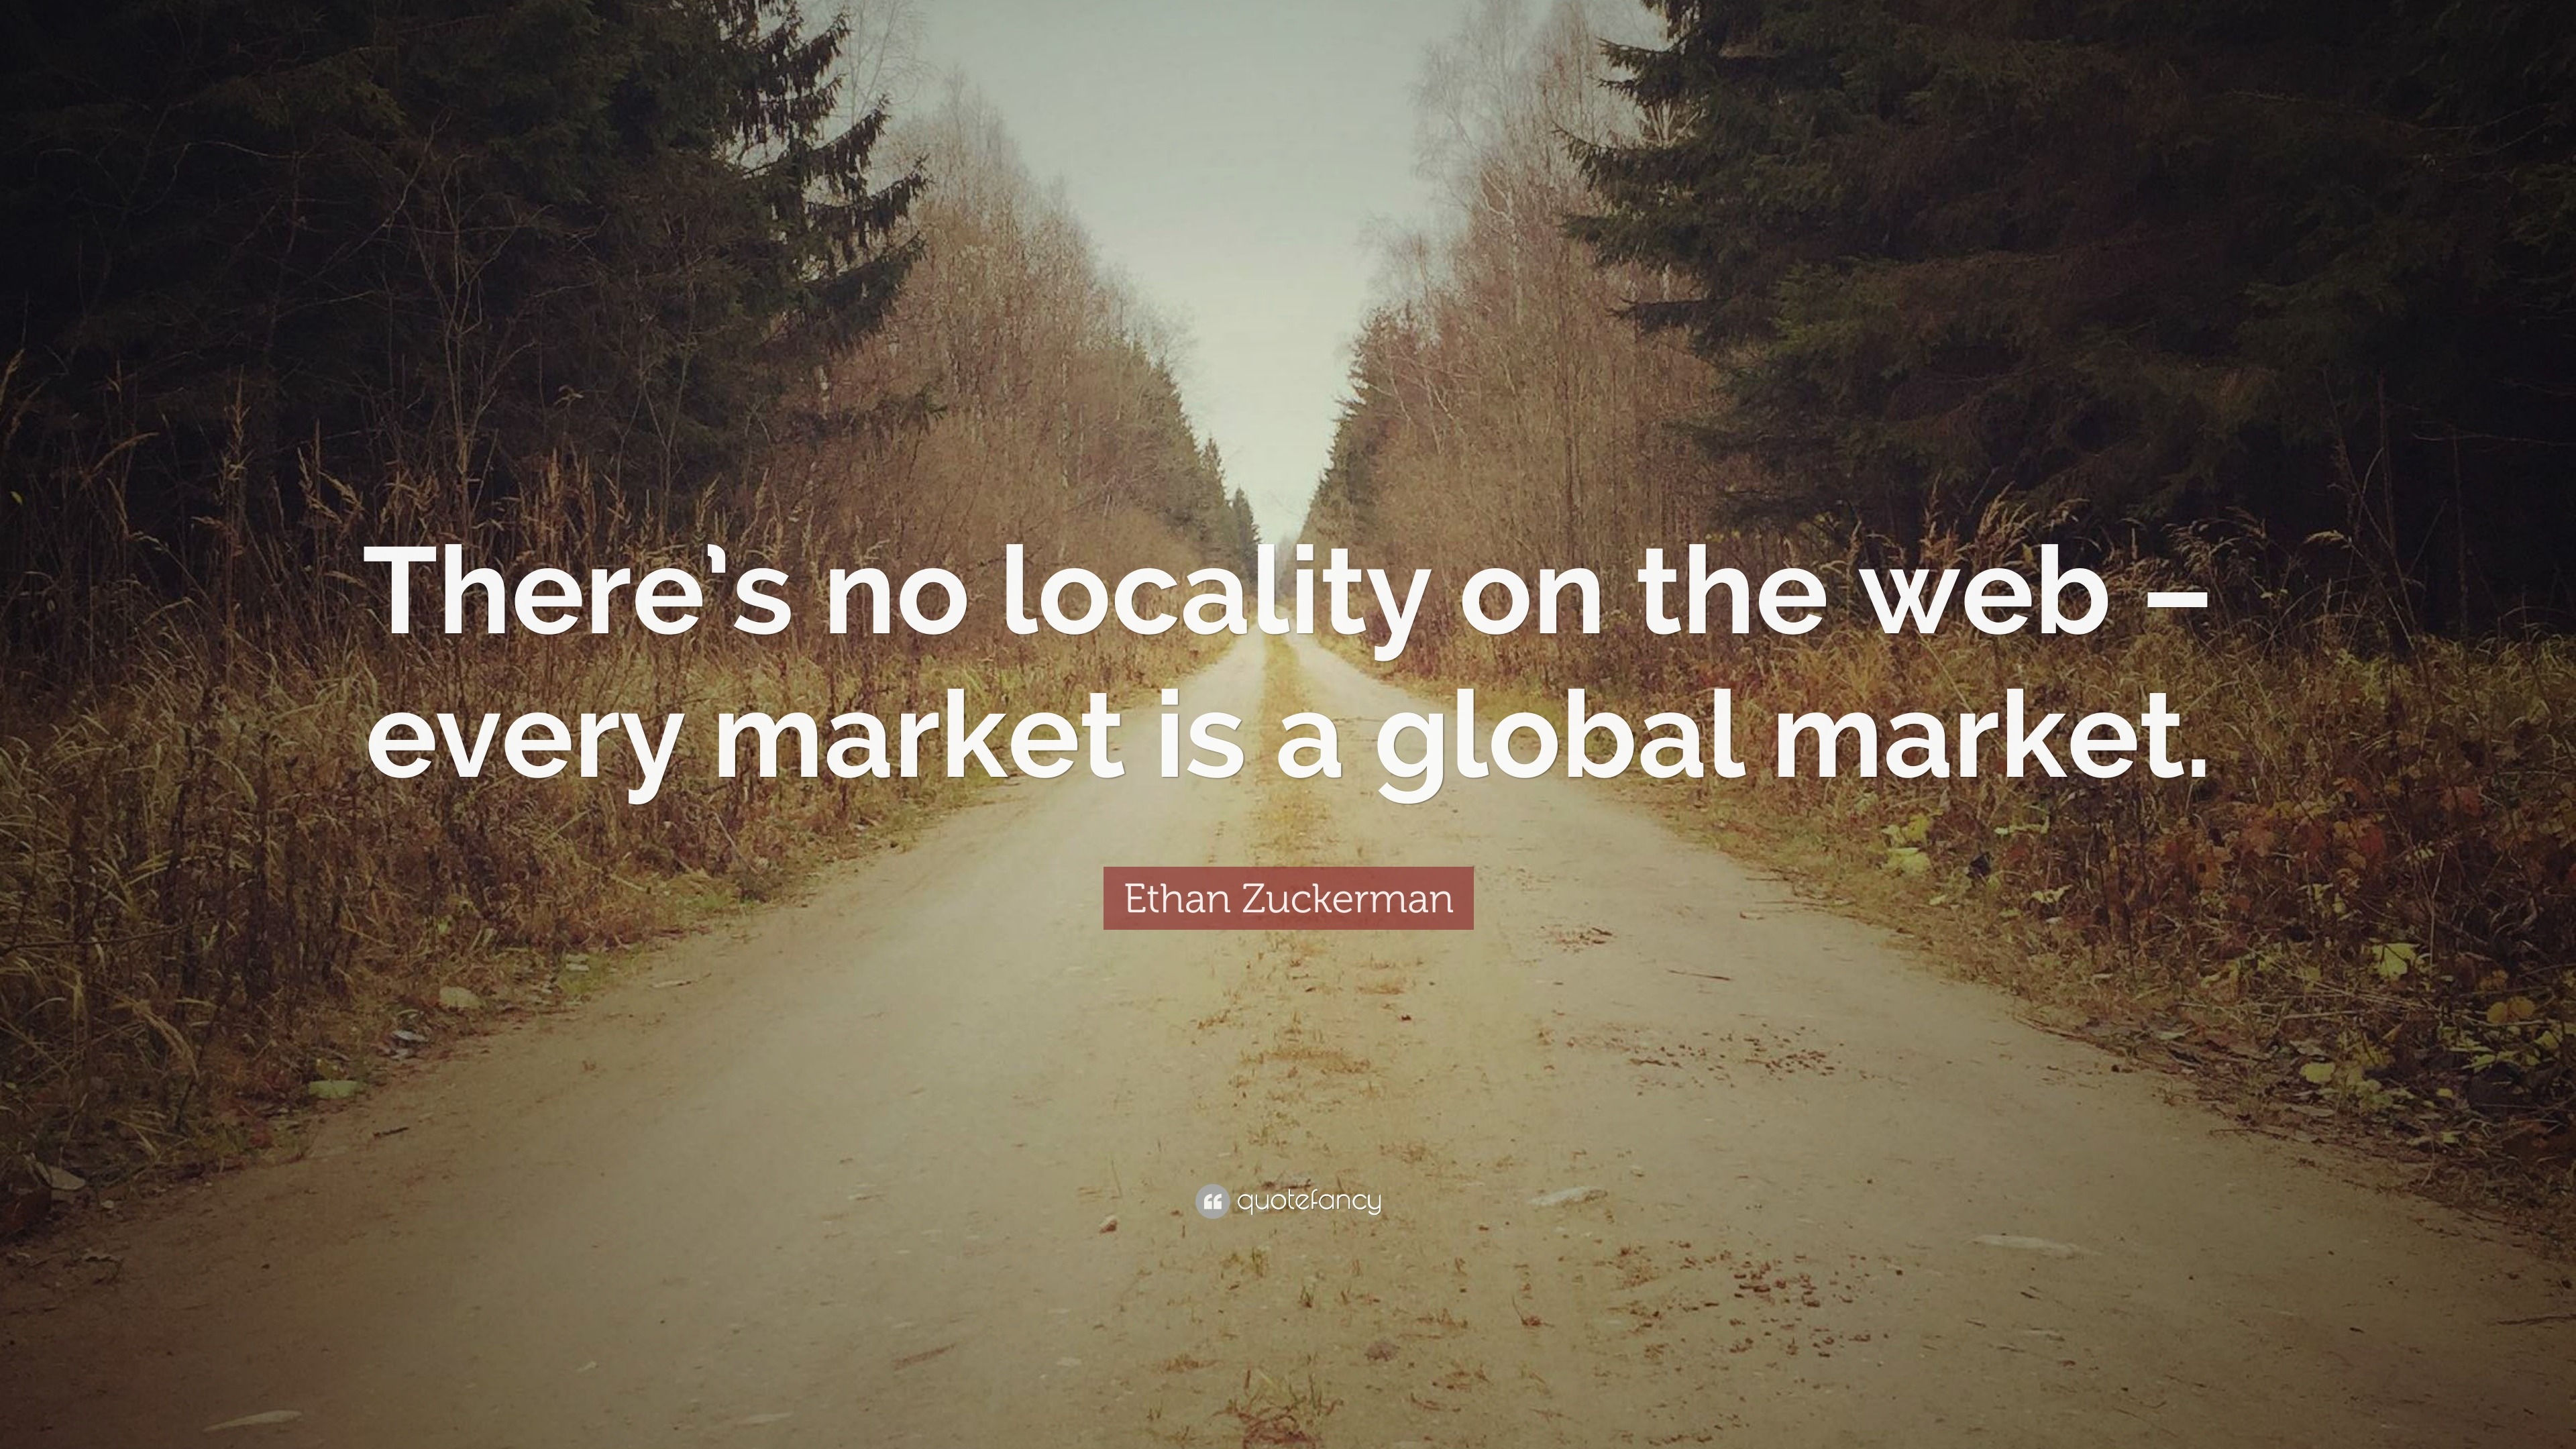 Ethan Zuckerman Quote: “There's no locality on the web – every